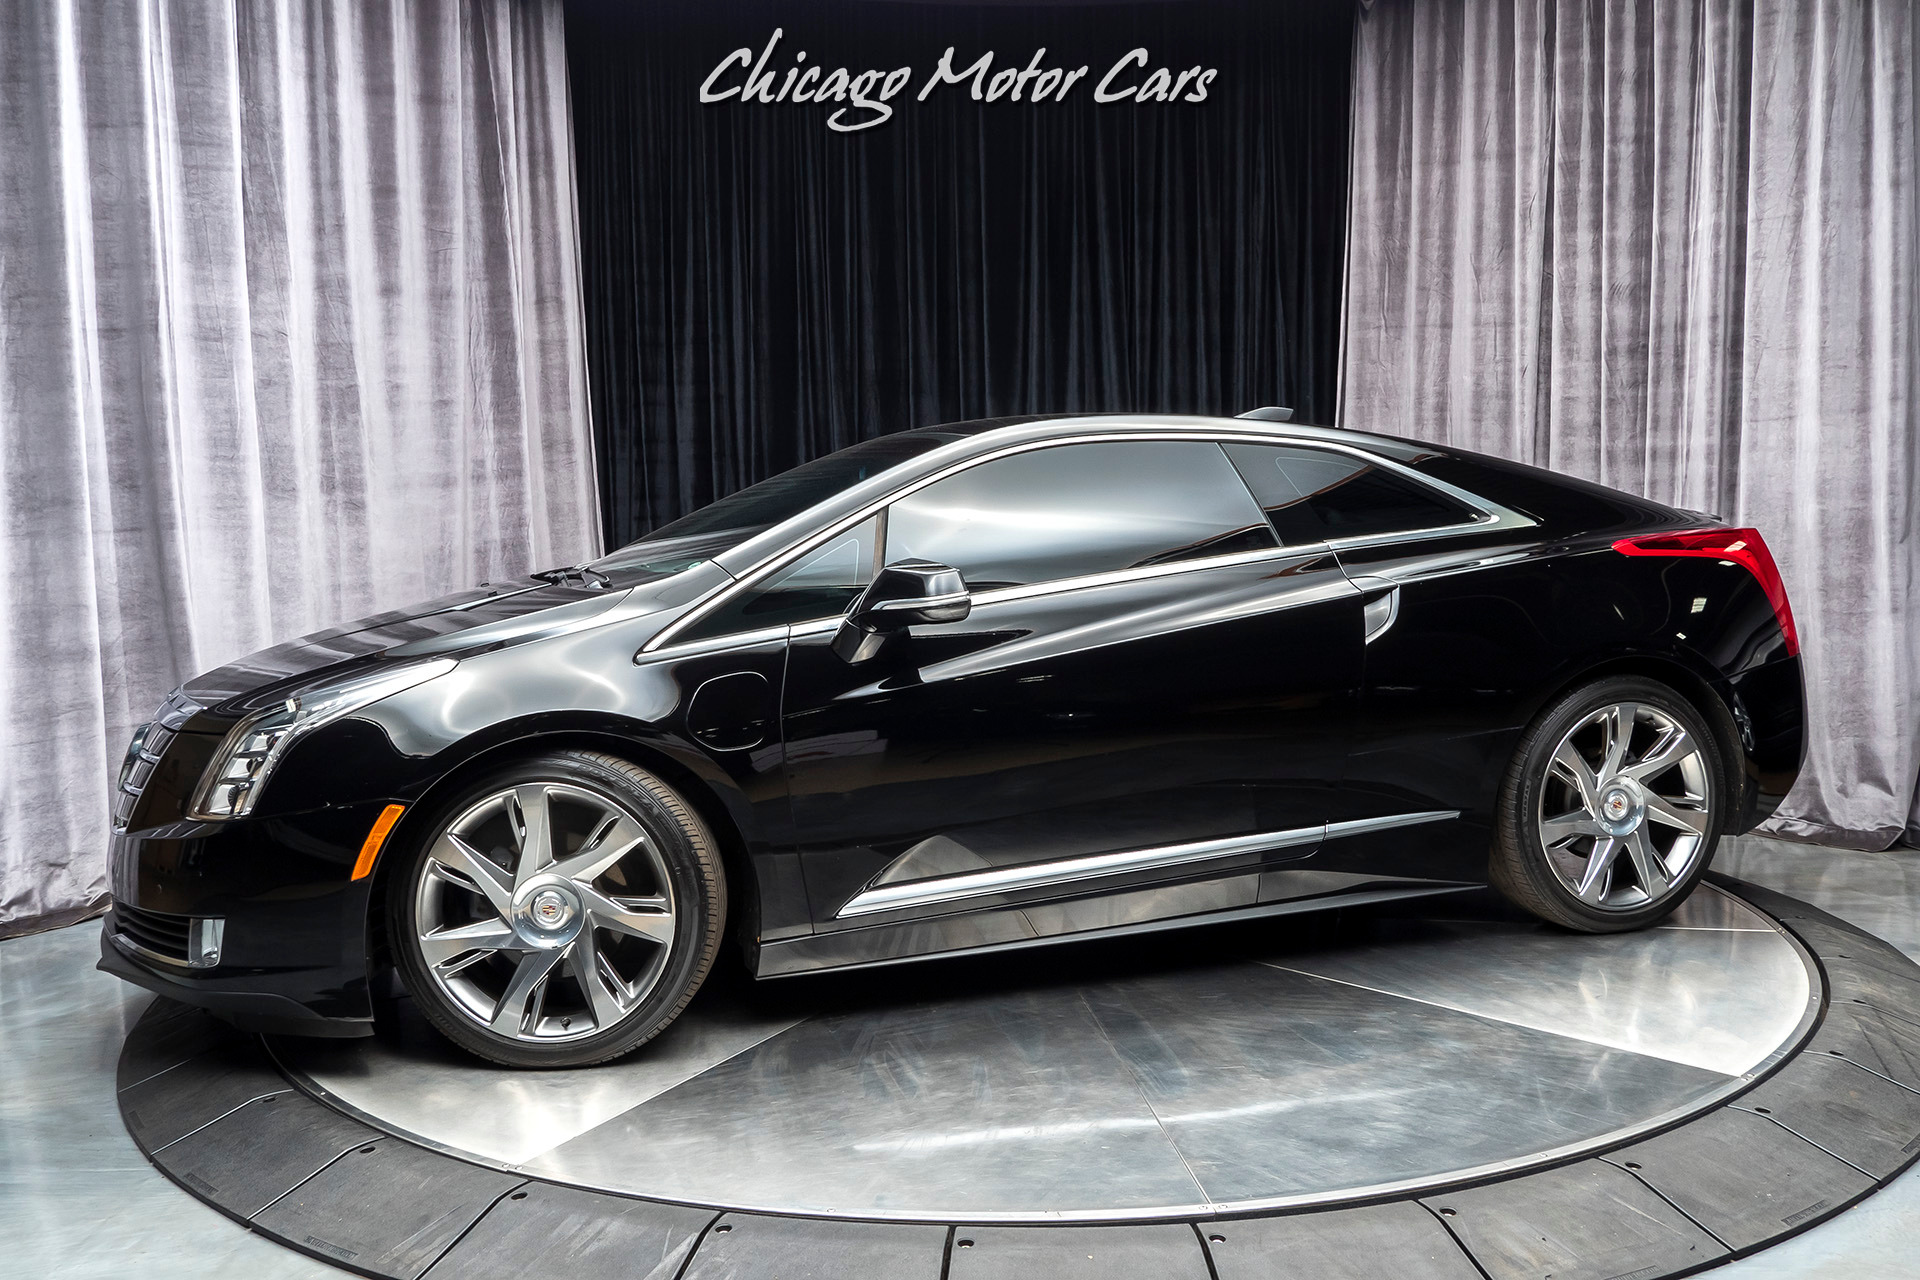 Used 2014 Cadillac ELR PlugIn Hybrid For Sale (Special Pricing